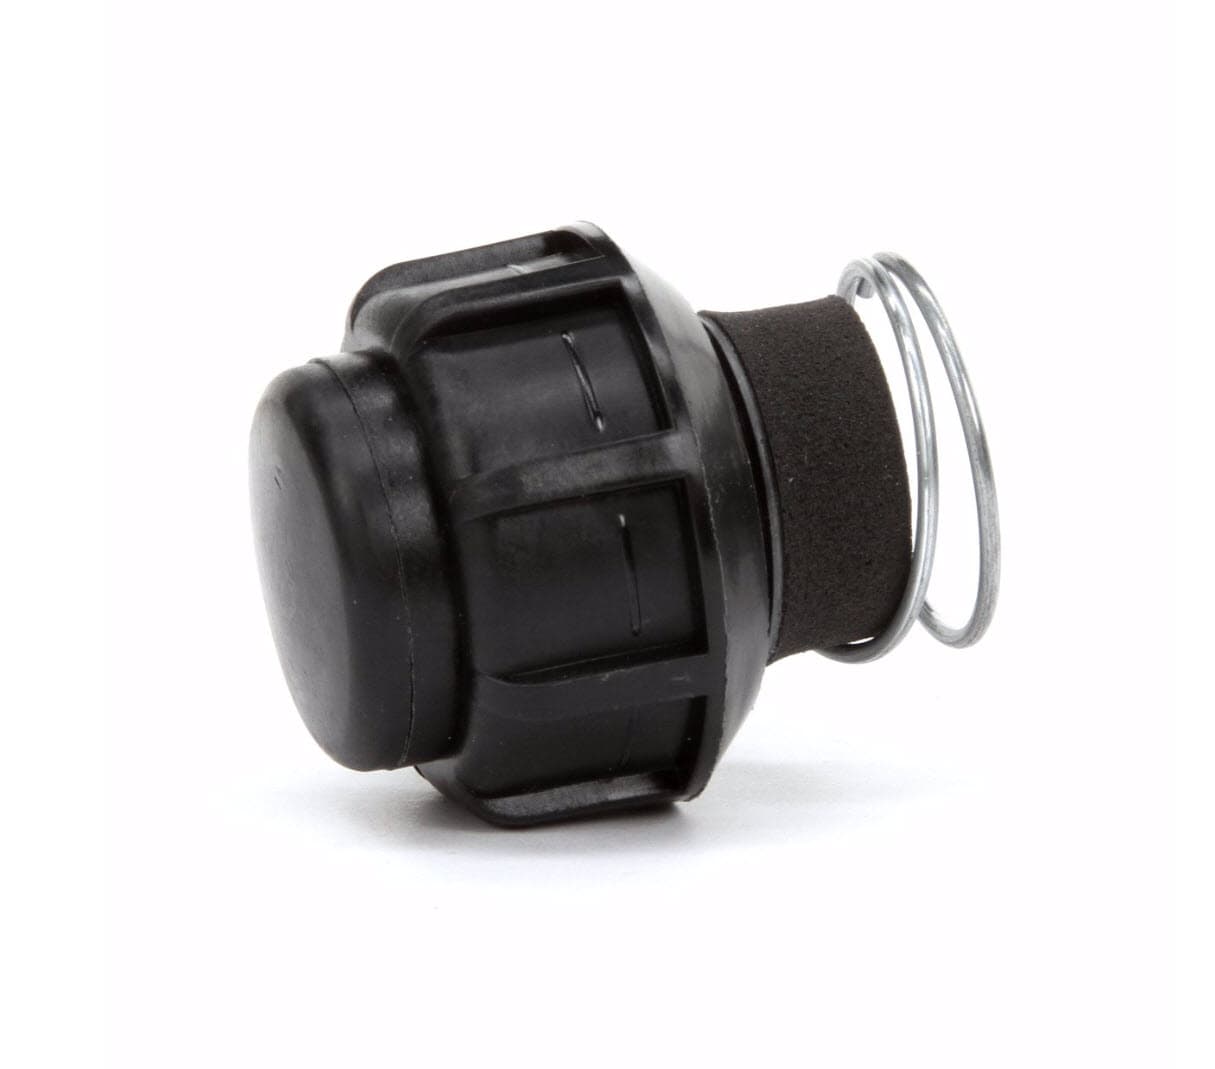 REPLACEMENT BUMP KNOB FOR REEL-EASY TRIMMER HEAD